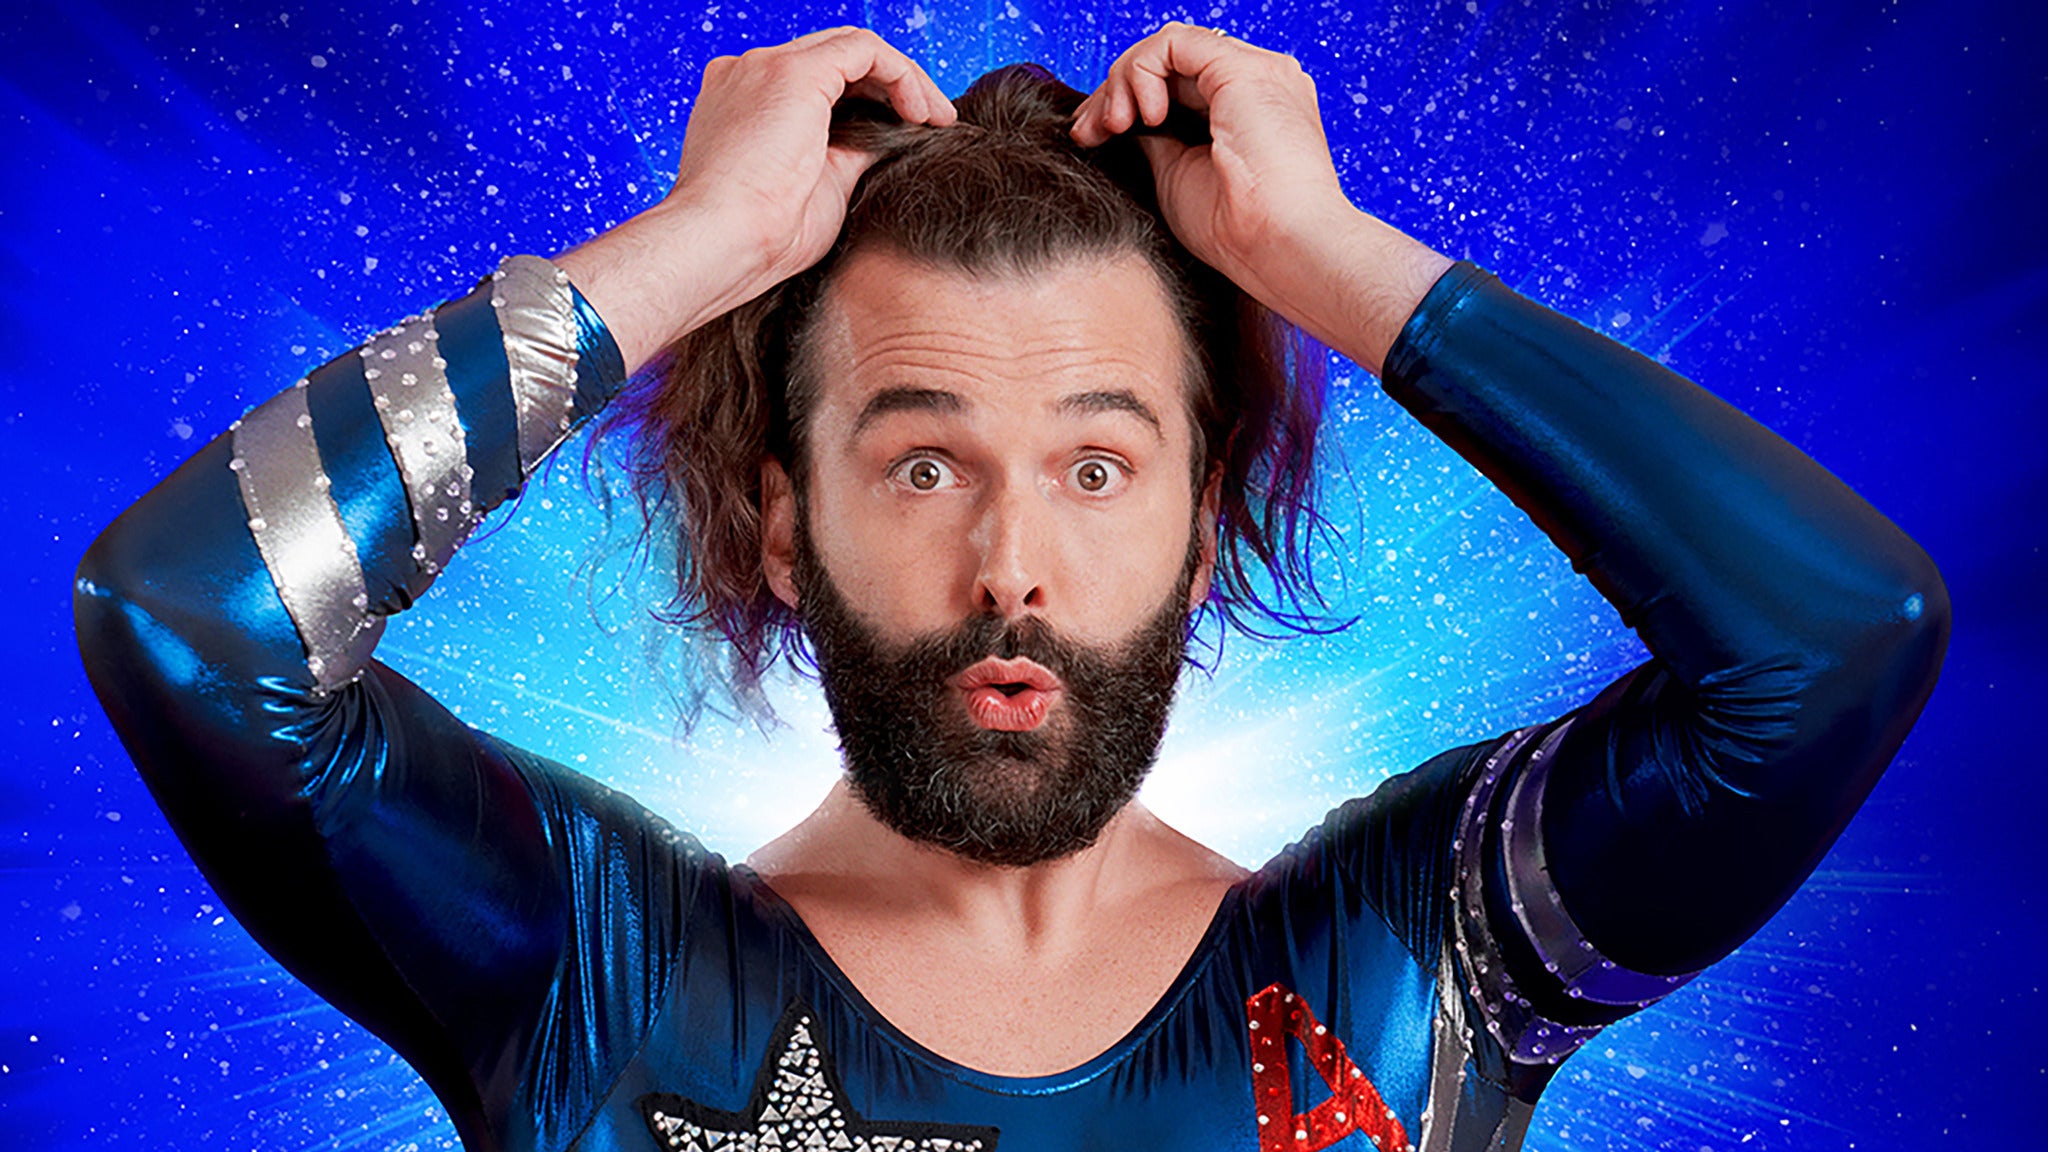 Image used with permission from Ticketmaster | Jonathan Van Ness: Imaginary Living Room Olympian tickets